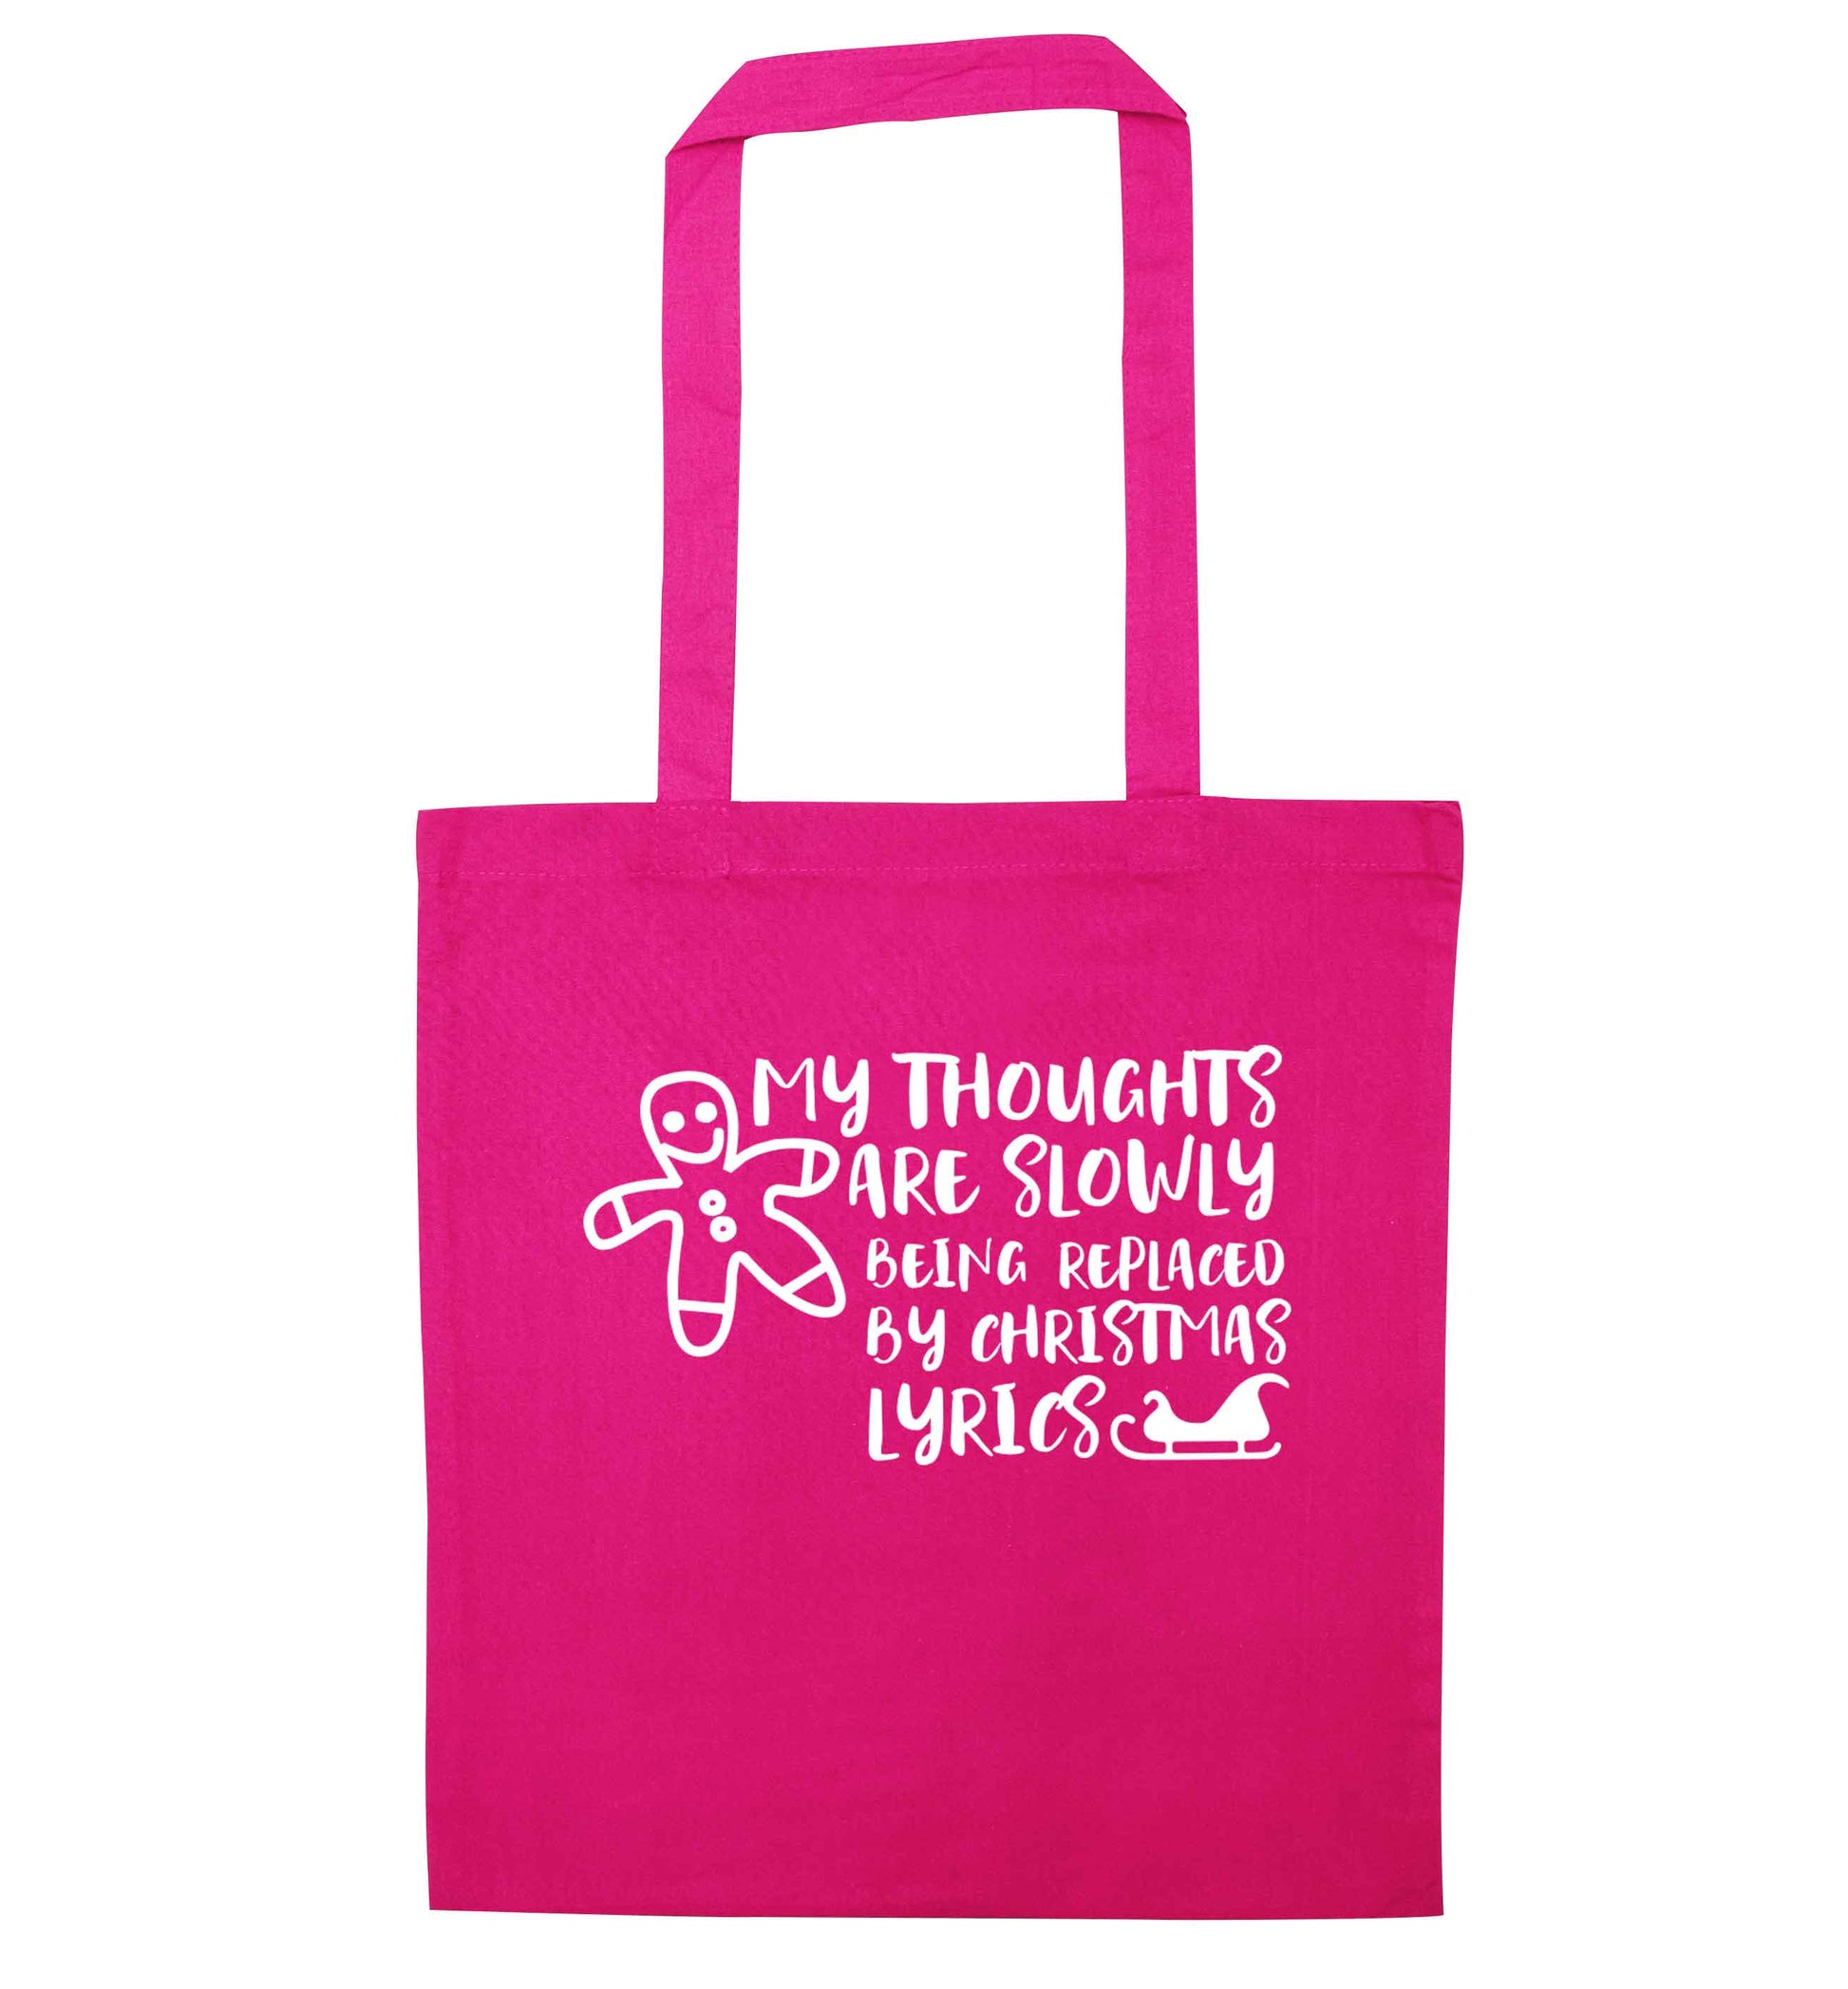 My thoughts are slowly being replaced by Christmas lyrics pink tote bag